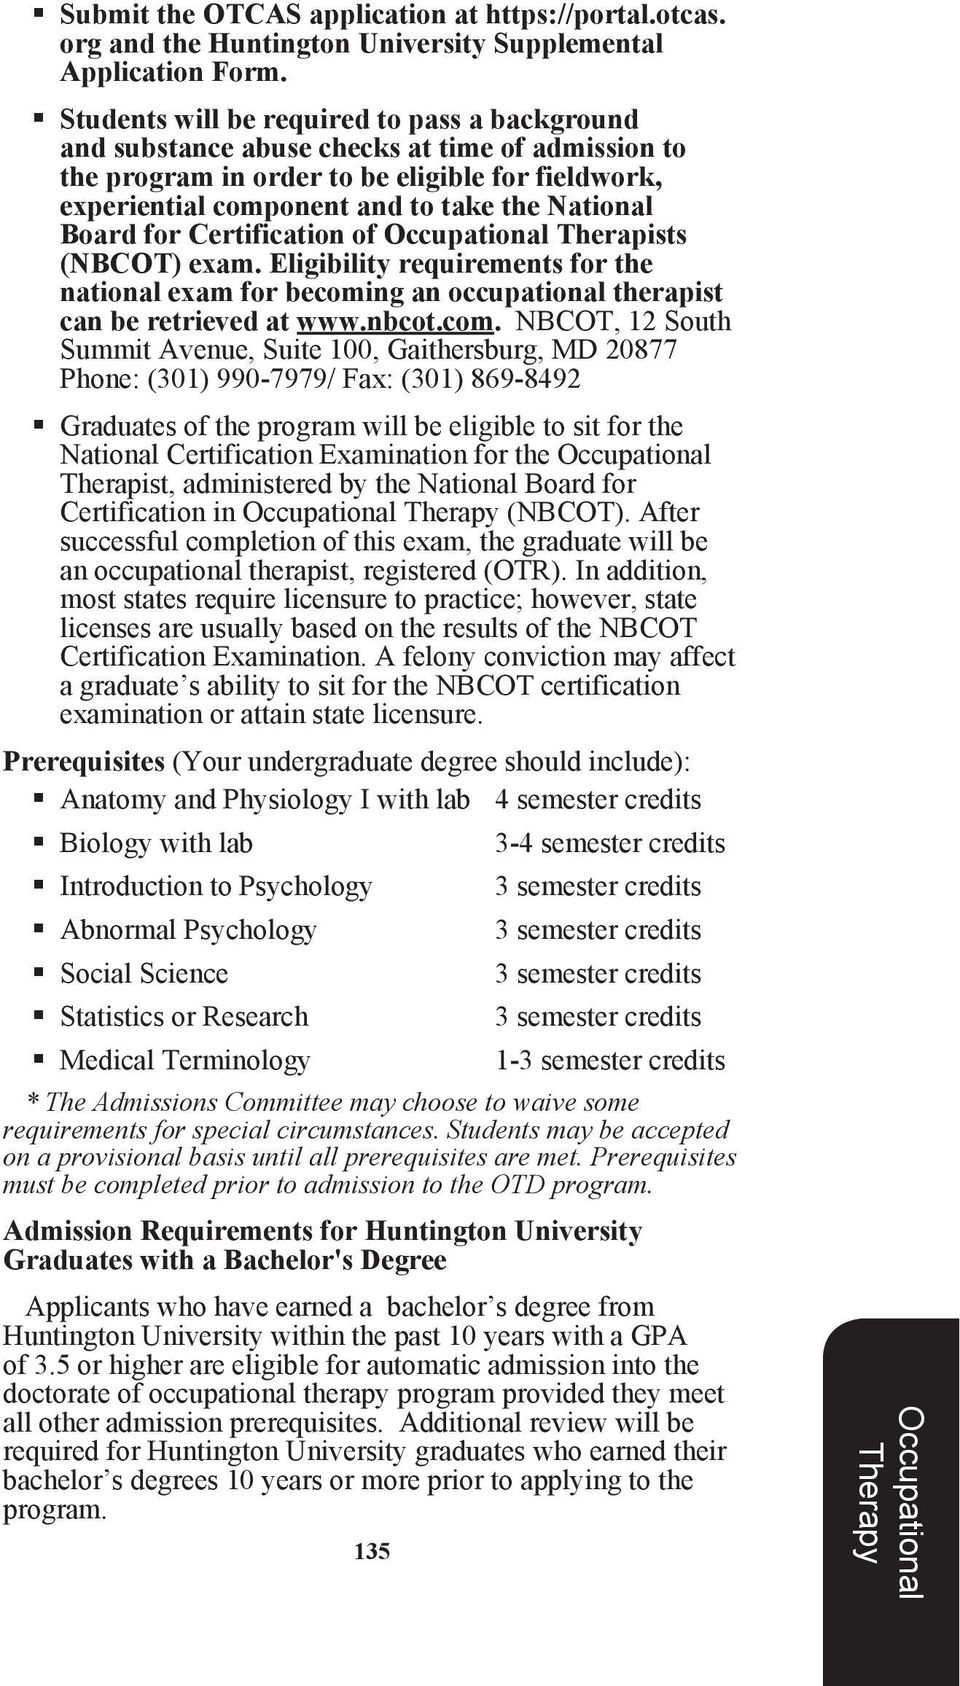 Board for Certification of Therapists (NBCOT) exam. Eligibility requirements for the national exam for becomi